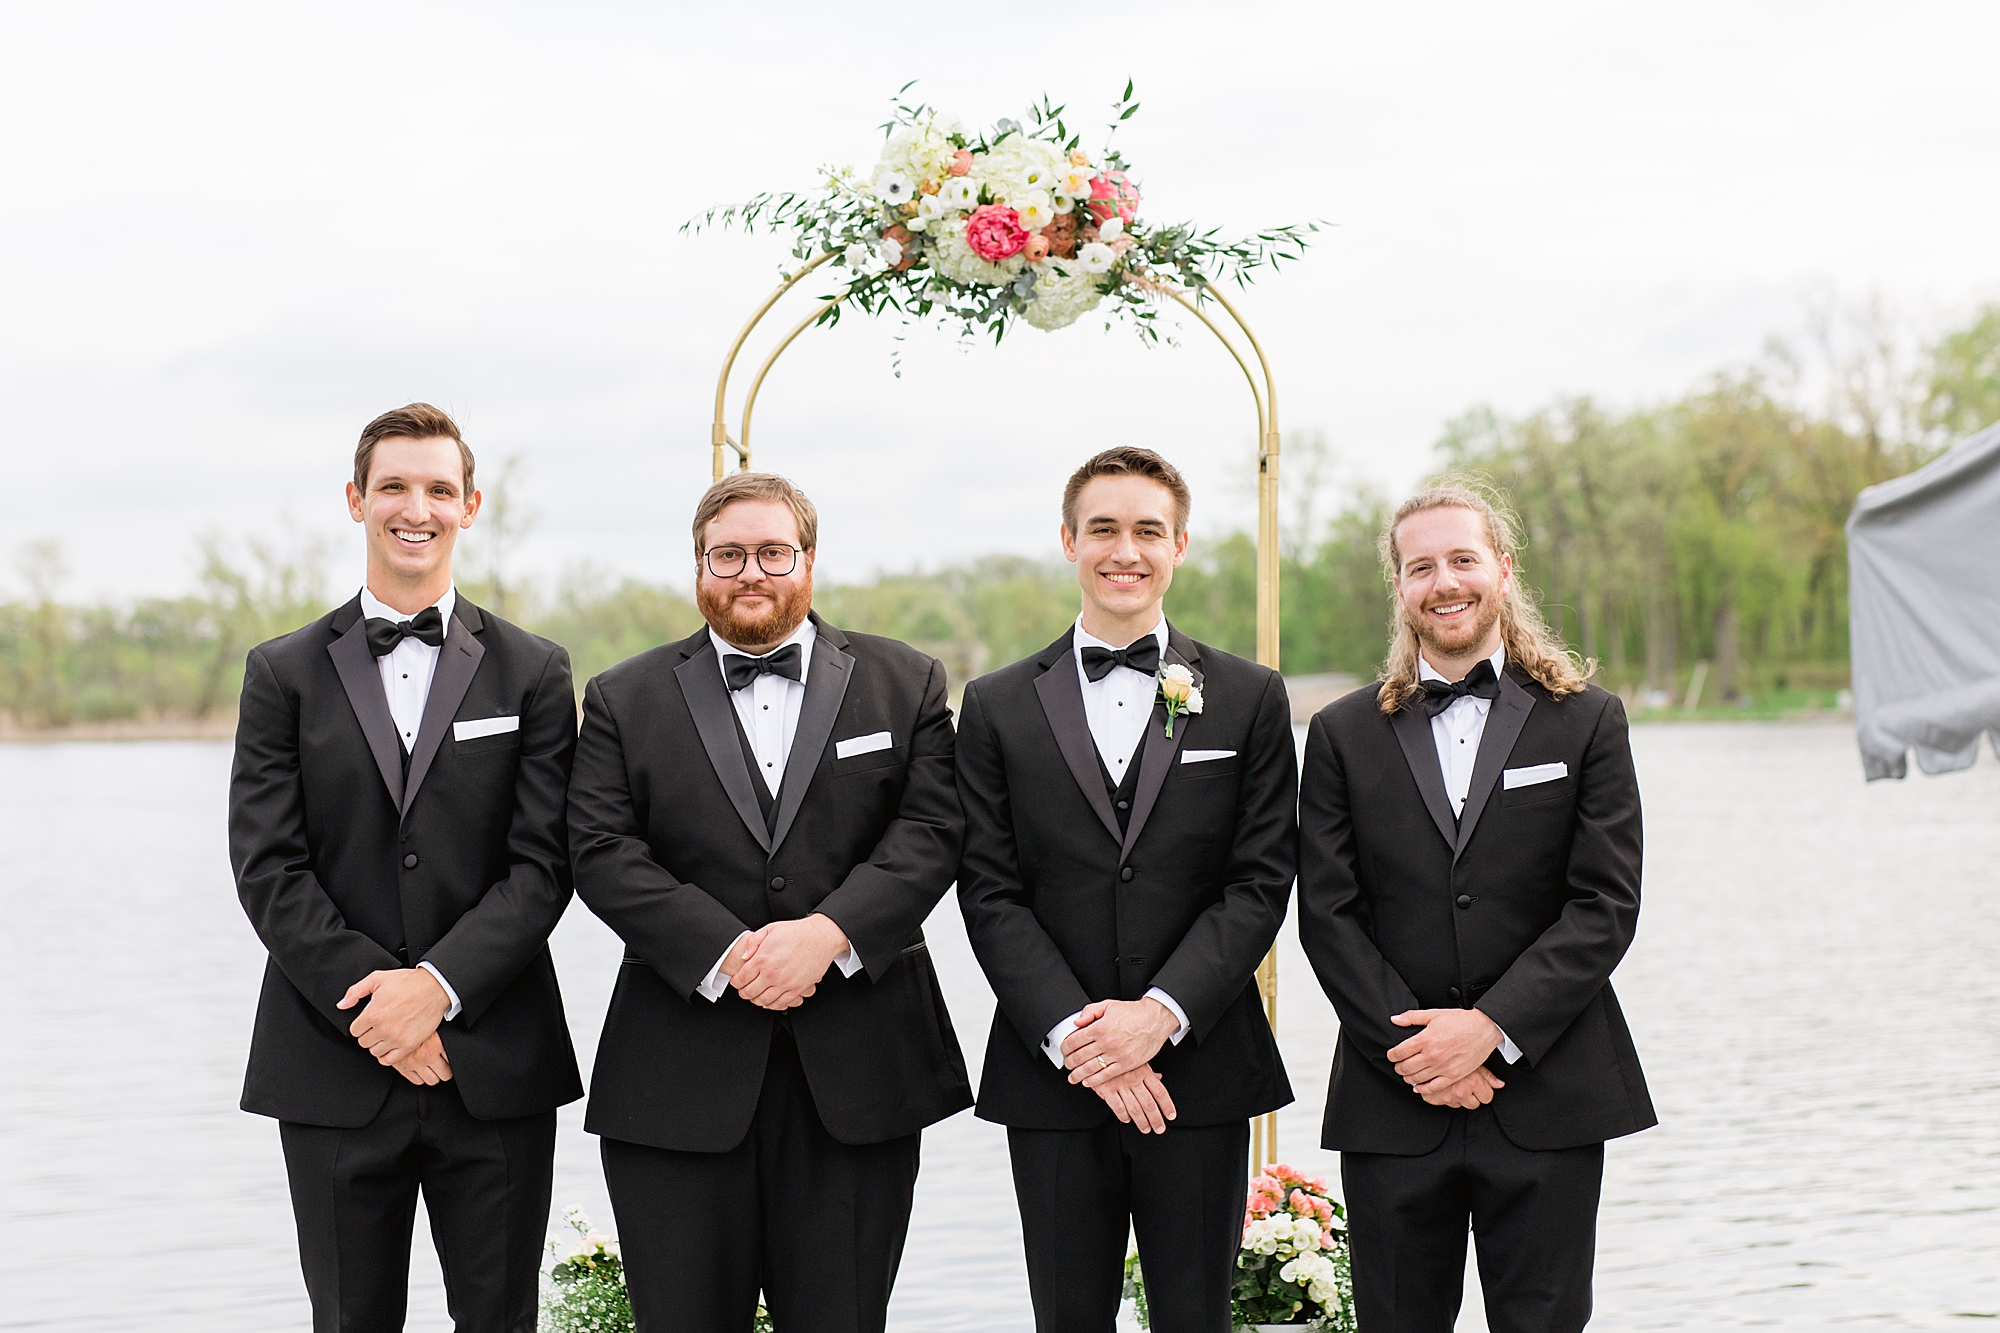 Groomsmen by the lake | Christie and AJ - Private Home Wedding - Breanne Rochelle Photography